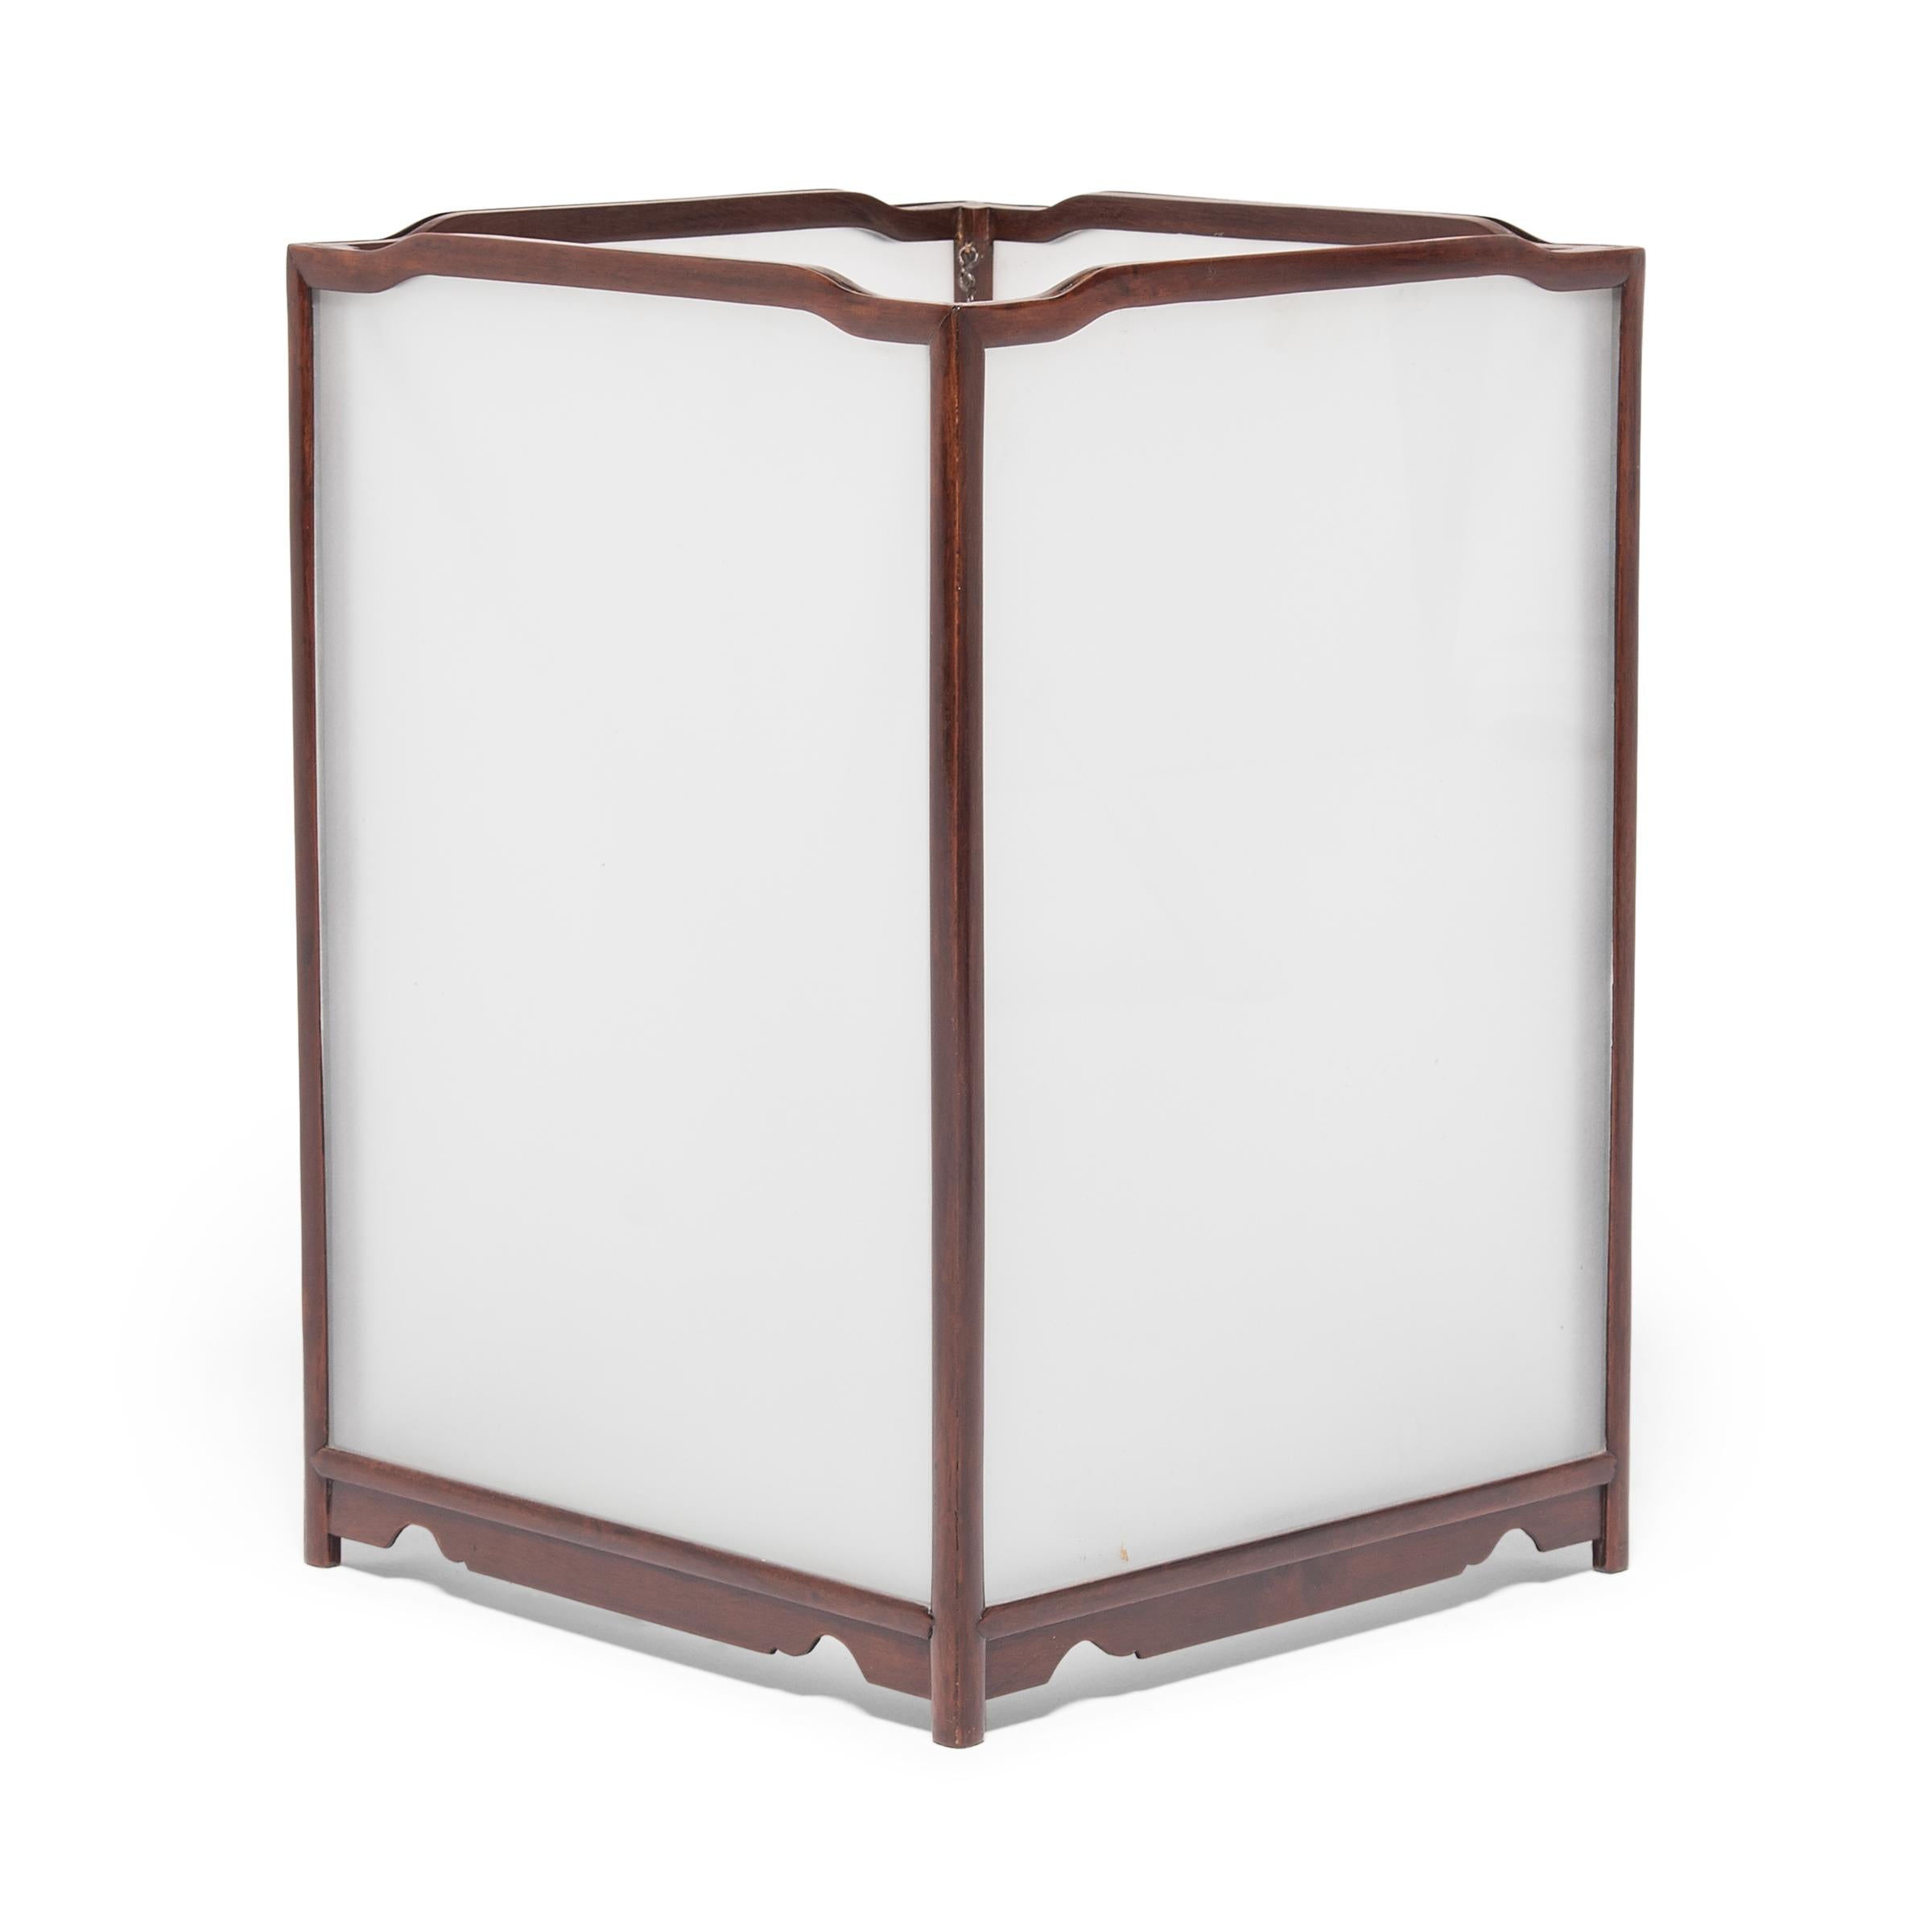 This elegant, delicately crafted lantern was made in northern China over a century ago. The simple frame is crafted of a fine hardwood and inset with panes of frosted glass. Lanterns in China have a history that goes back over 1,800 years to the Han